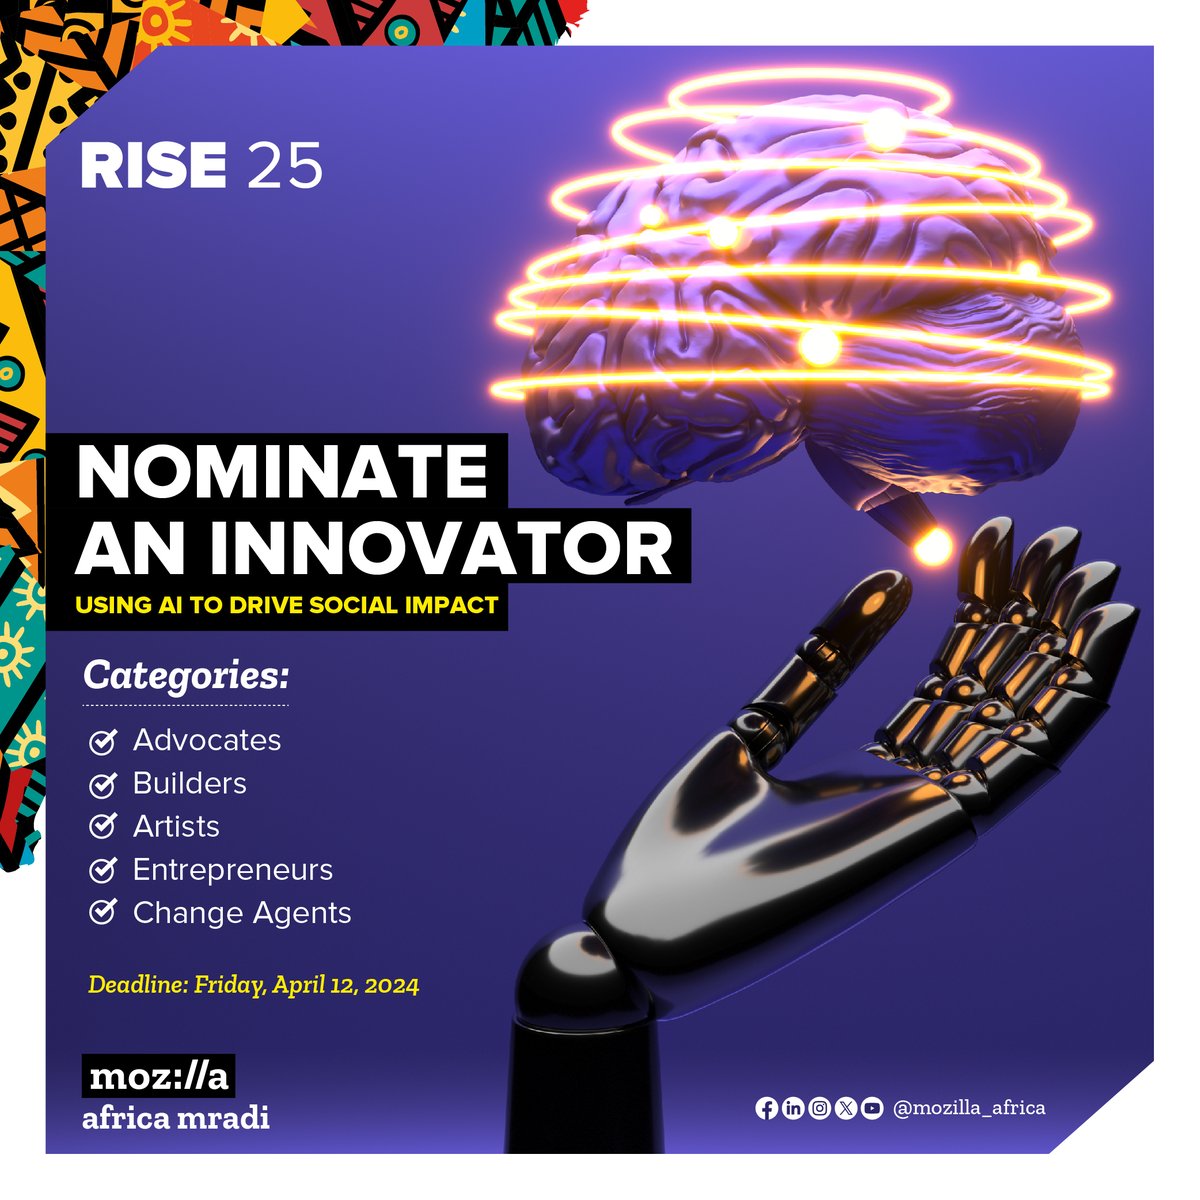 Nominations for the #Rise25 awards are open! Mozilla is looking for 25 visionaries to make AI better for the people. Click here to nominate someone by Friday, April 12, 2024! mozilla.org/en-US/rise25/n… #Rise25 #MozillaAfricaMradi